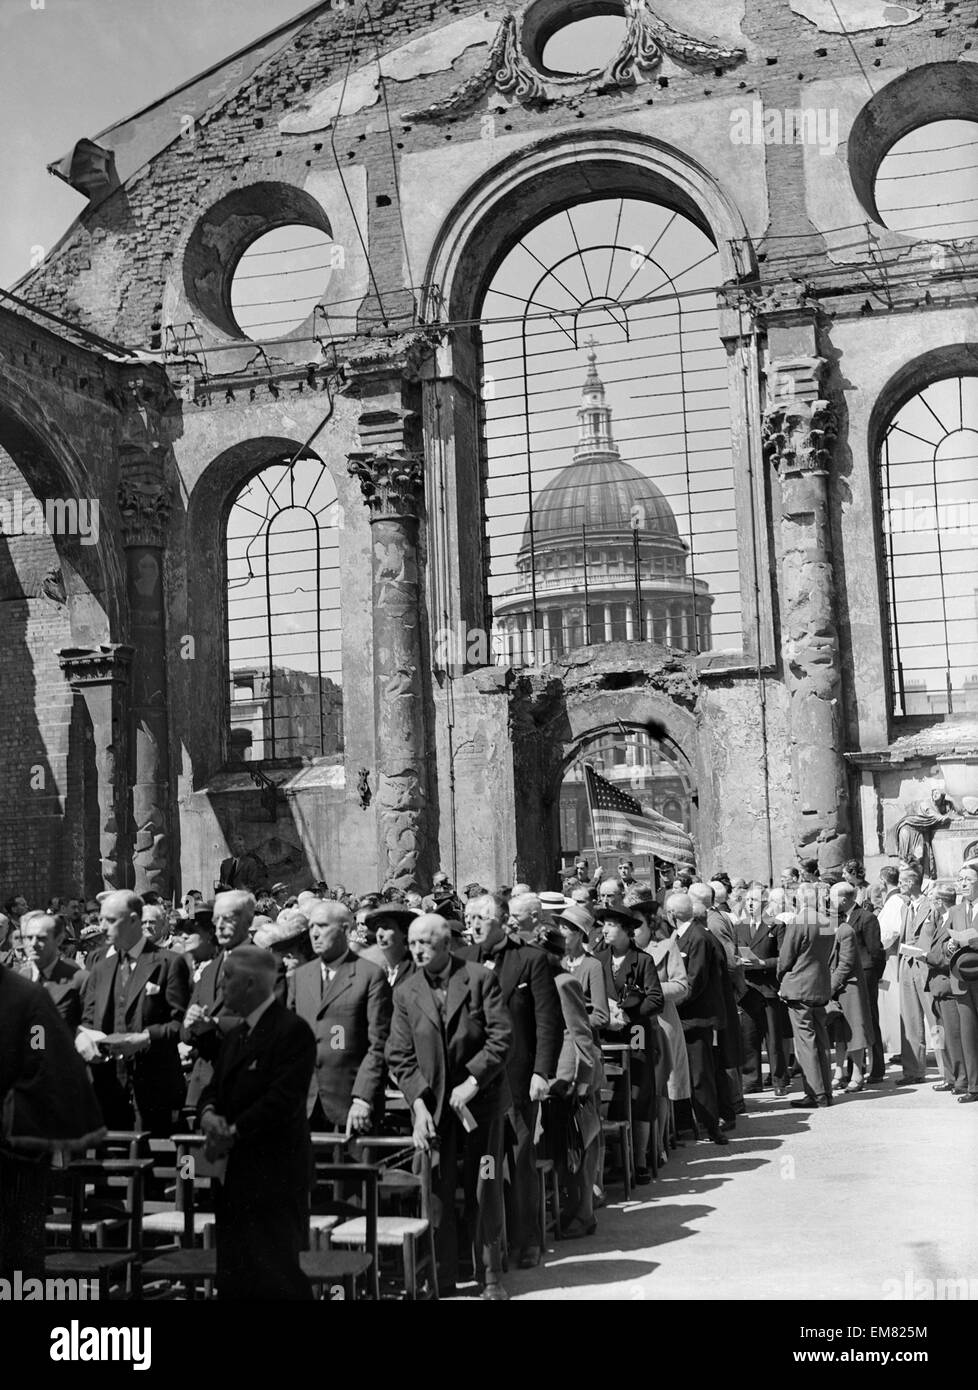 Service being held at St. Mary and Bow church in London during the Blitz attack of the German Luftwaffe. Circa 1940. Stock Photo